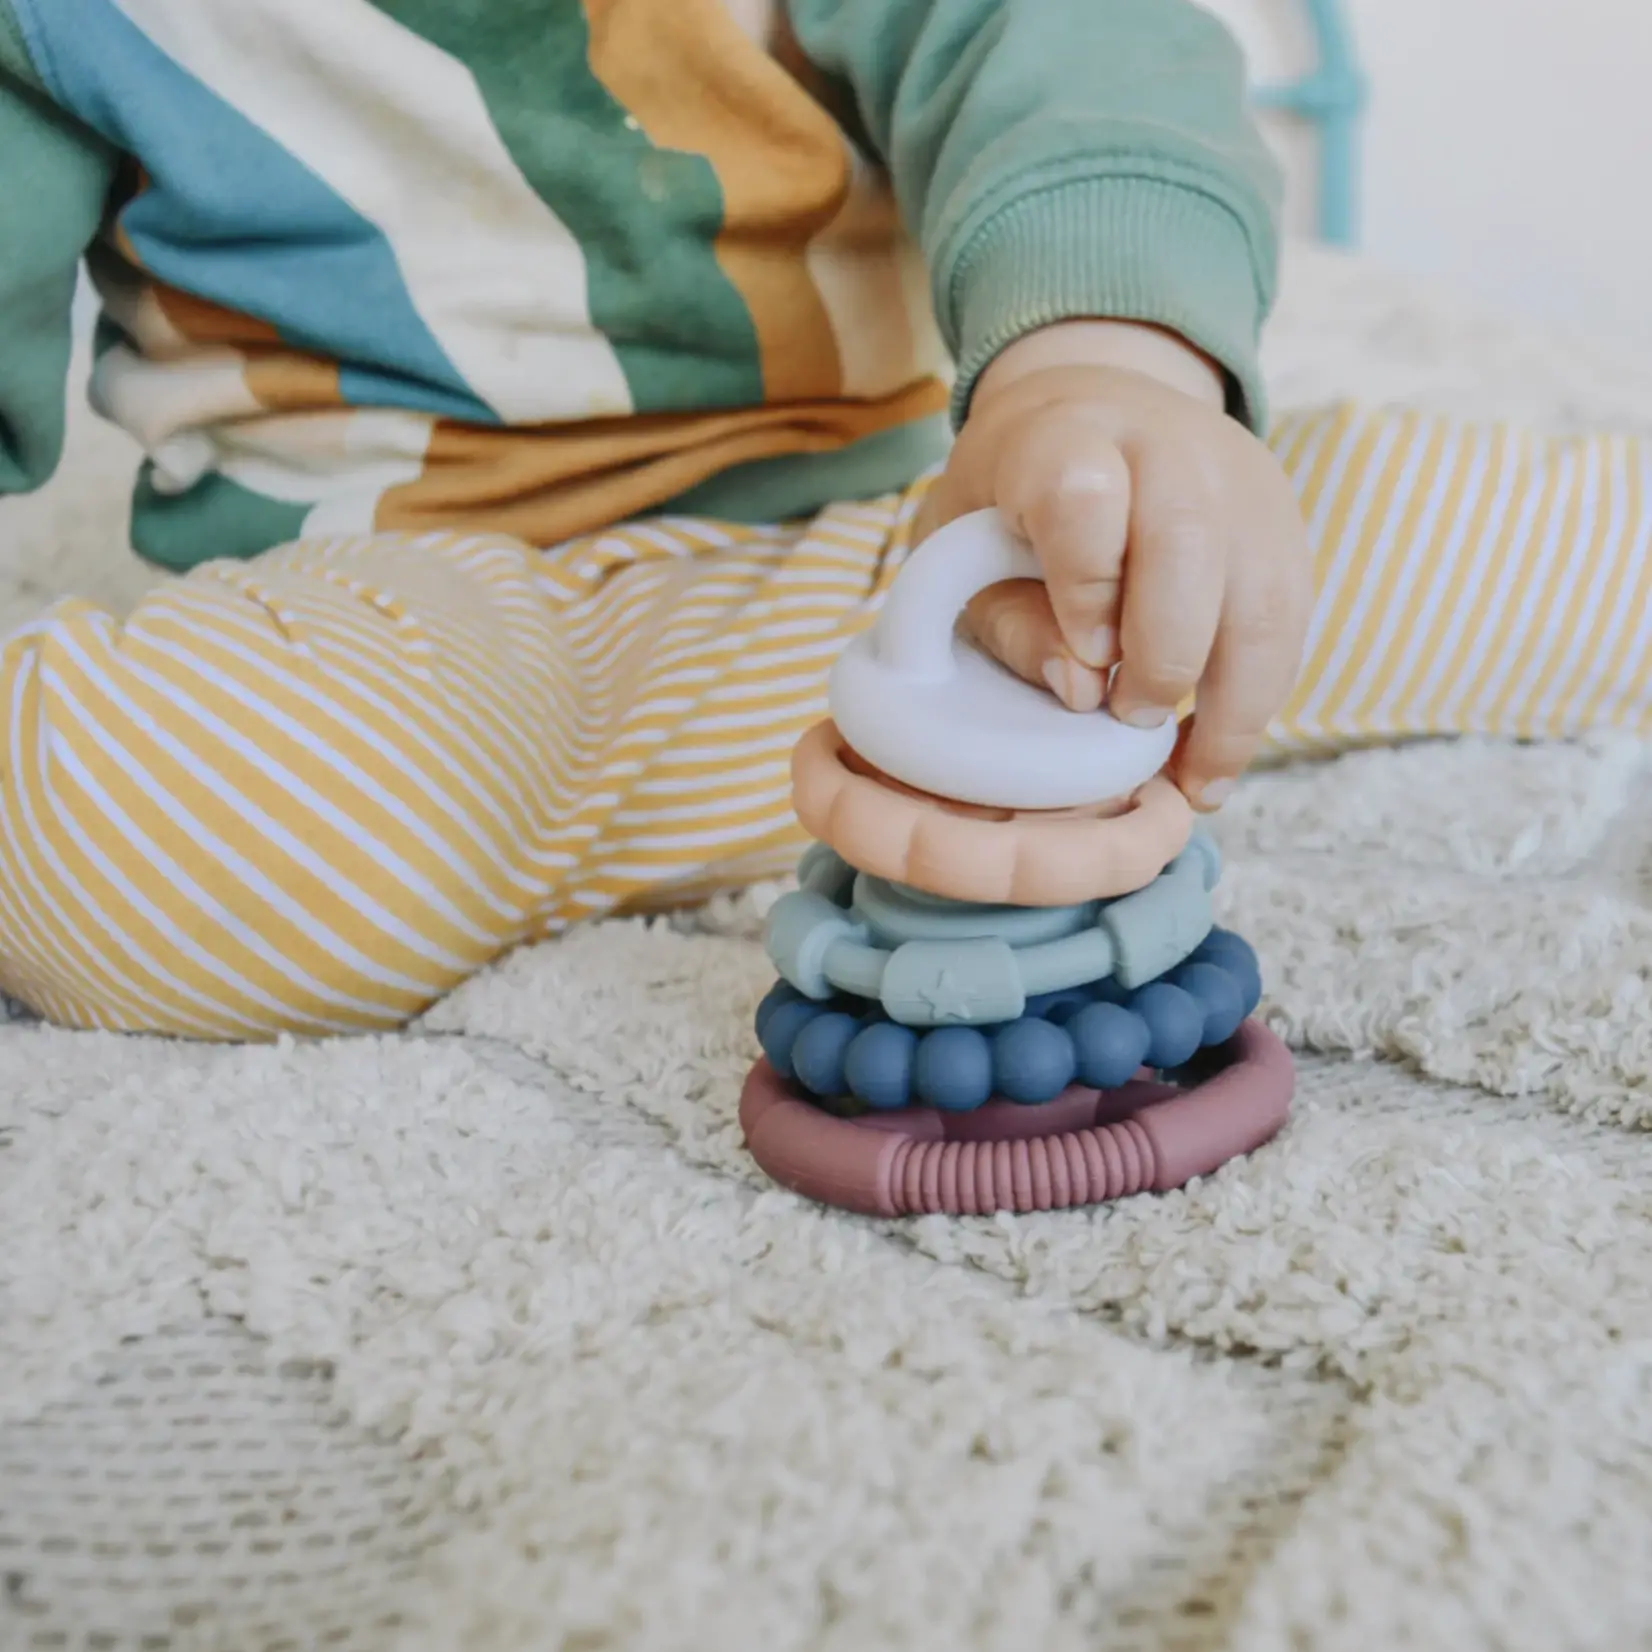 Jellystone Designs May Gibbs Stacker and Teether Toy